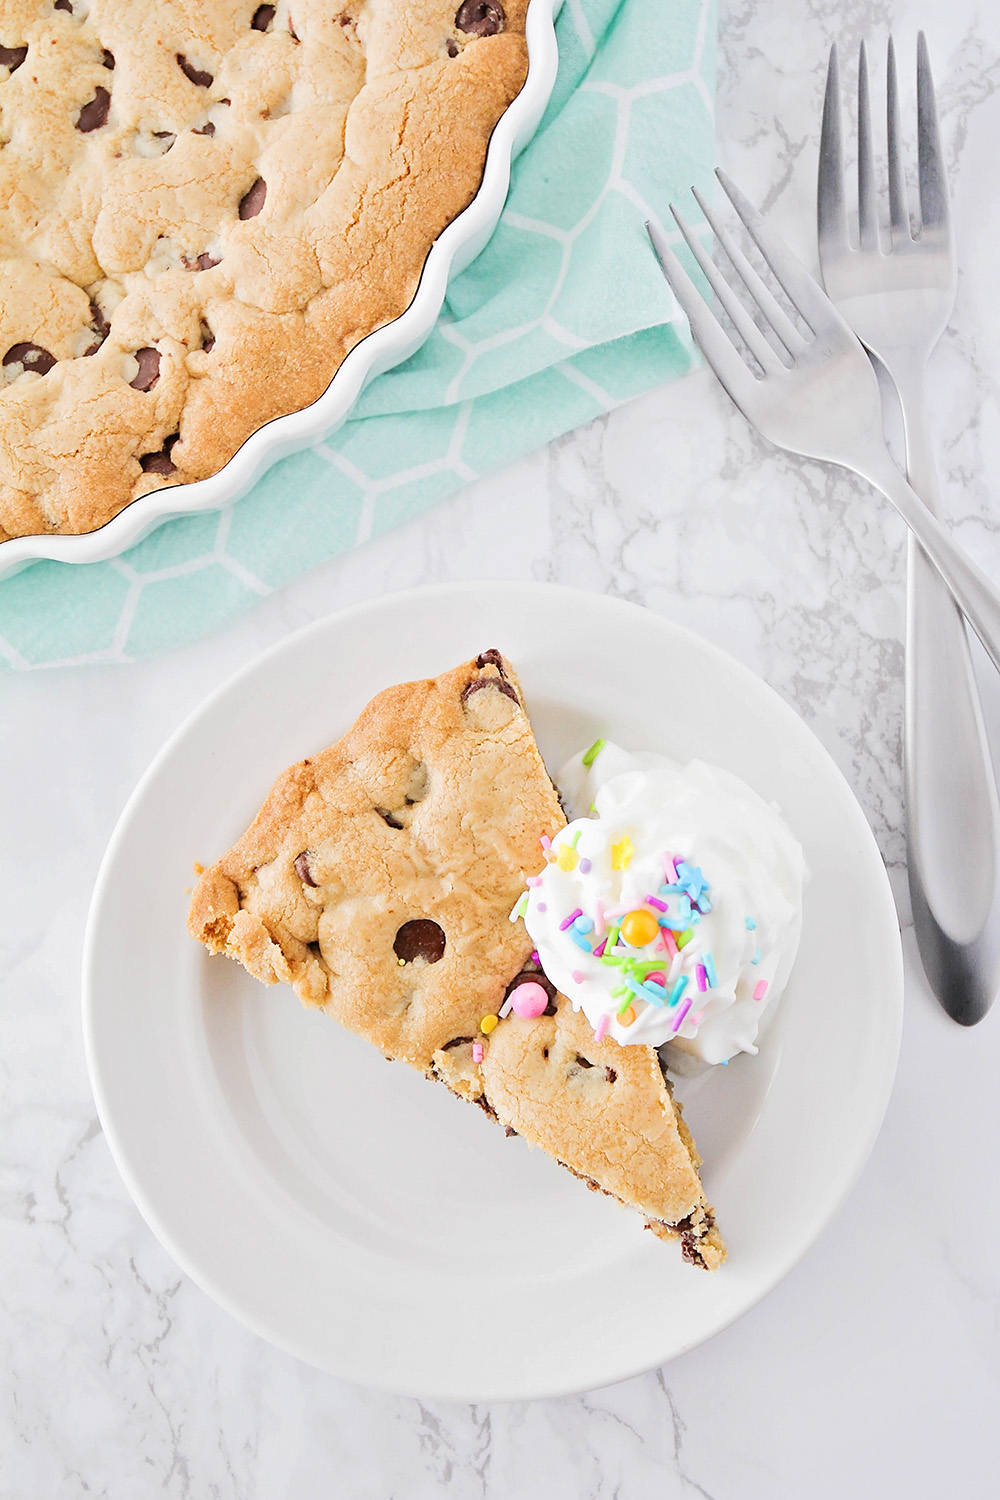 This delicious chocolate chip cookie cake is so easy to make, and perfect for any occasion!